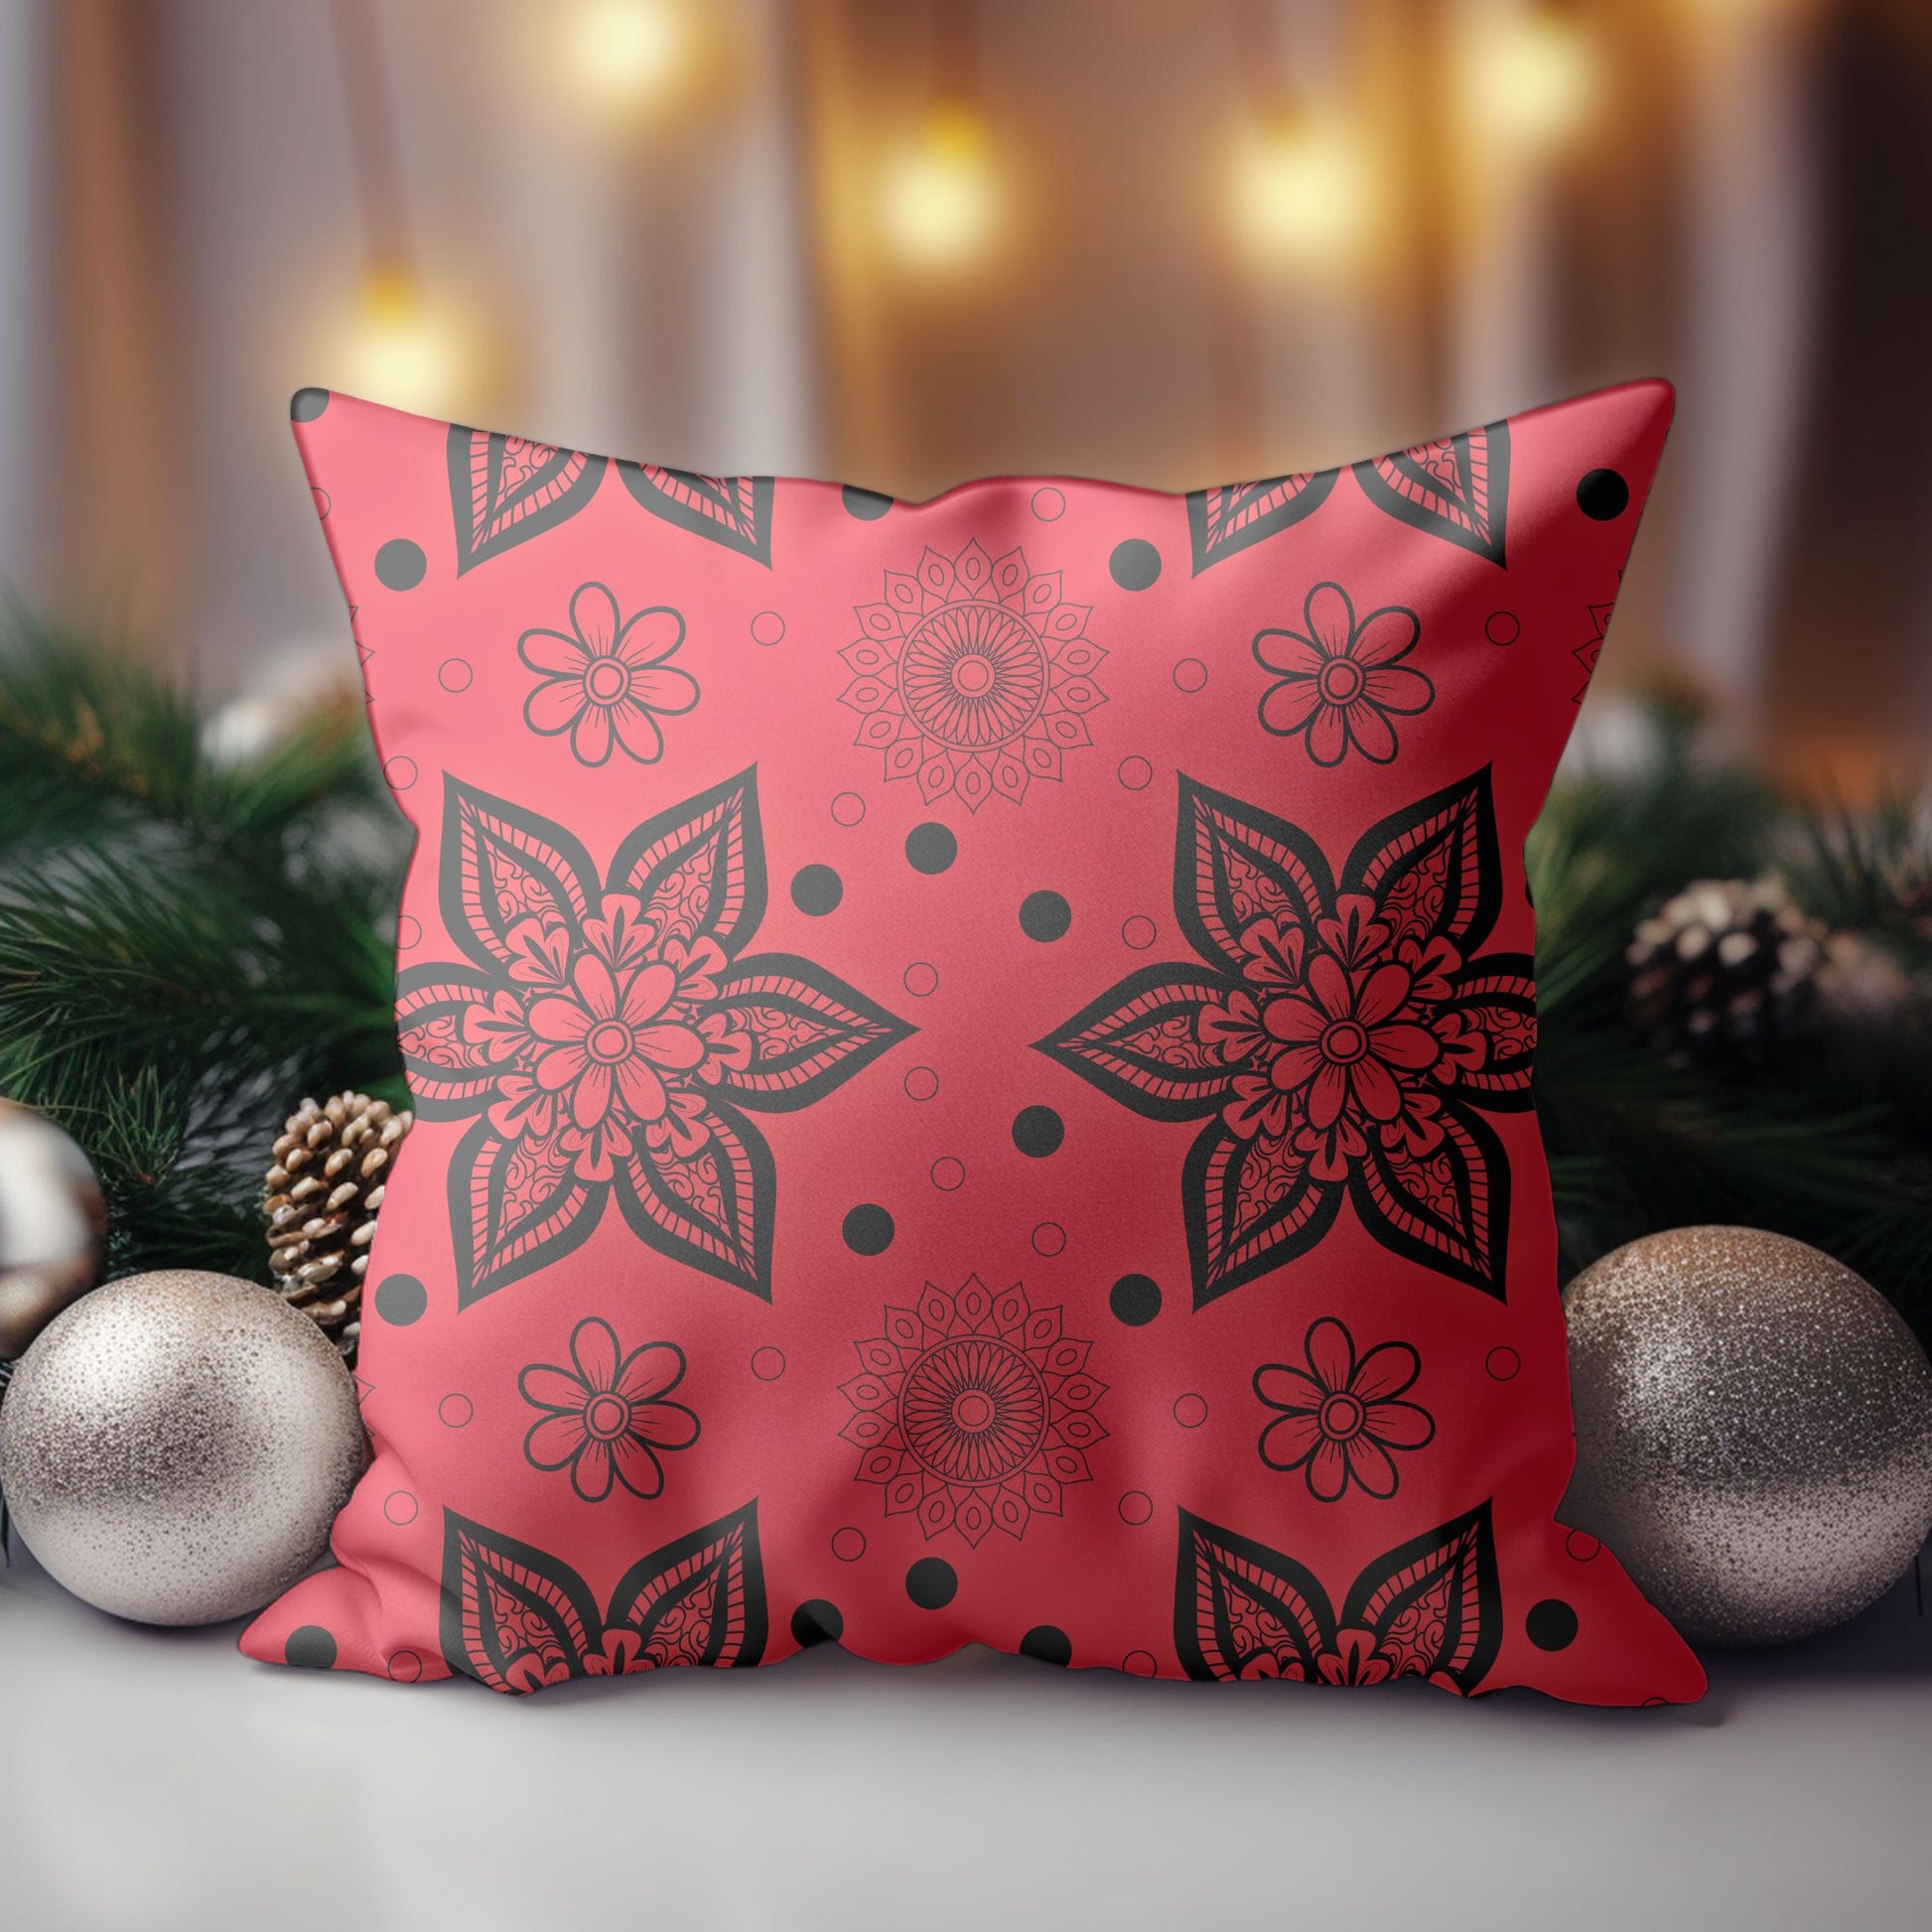 Red Christmas Throw Pillow with Snowflake Design